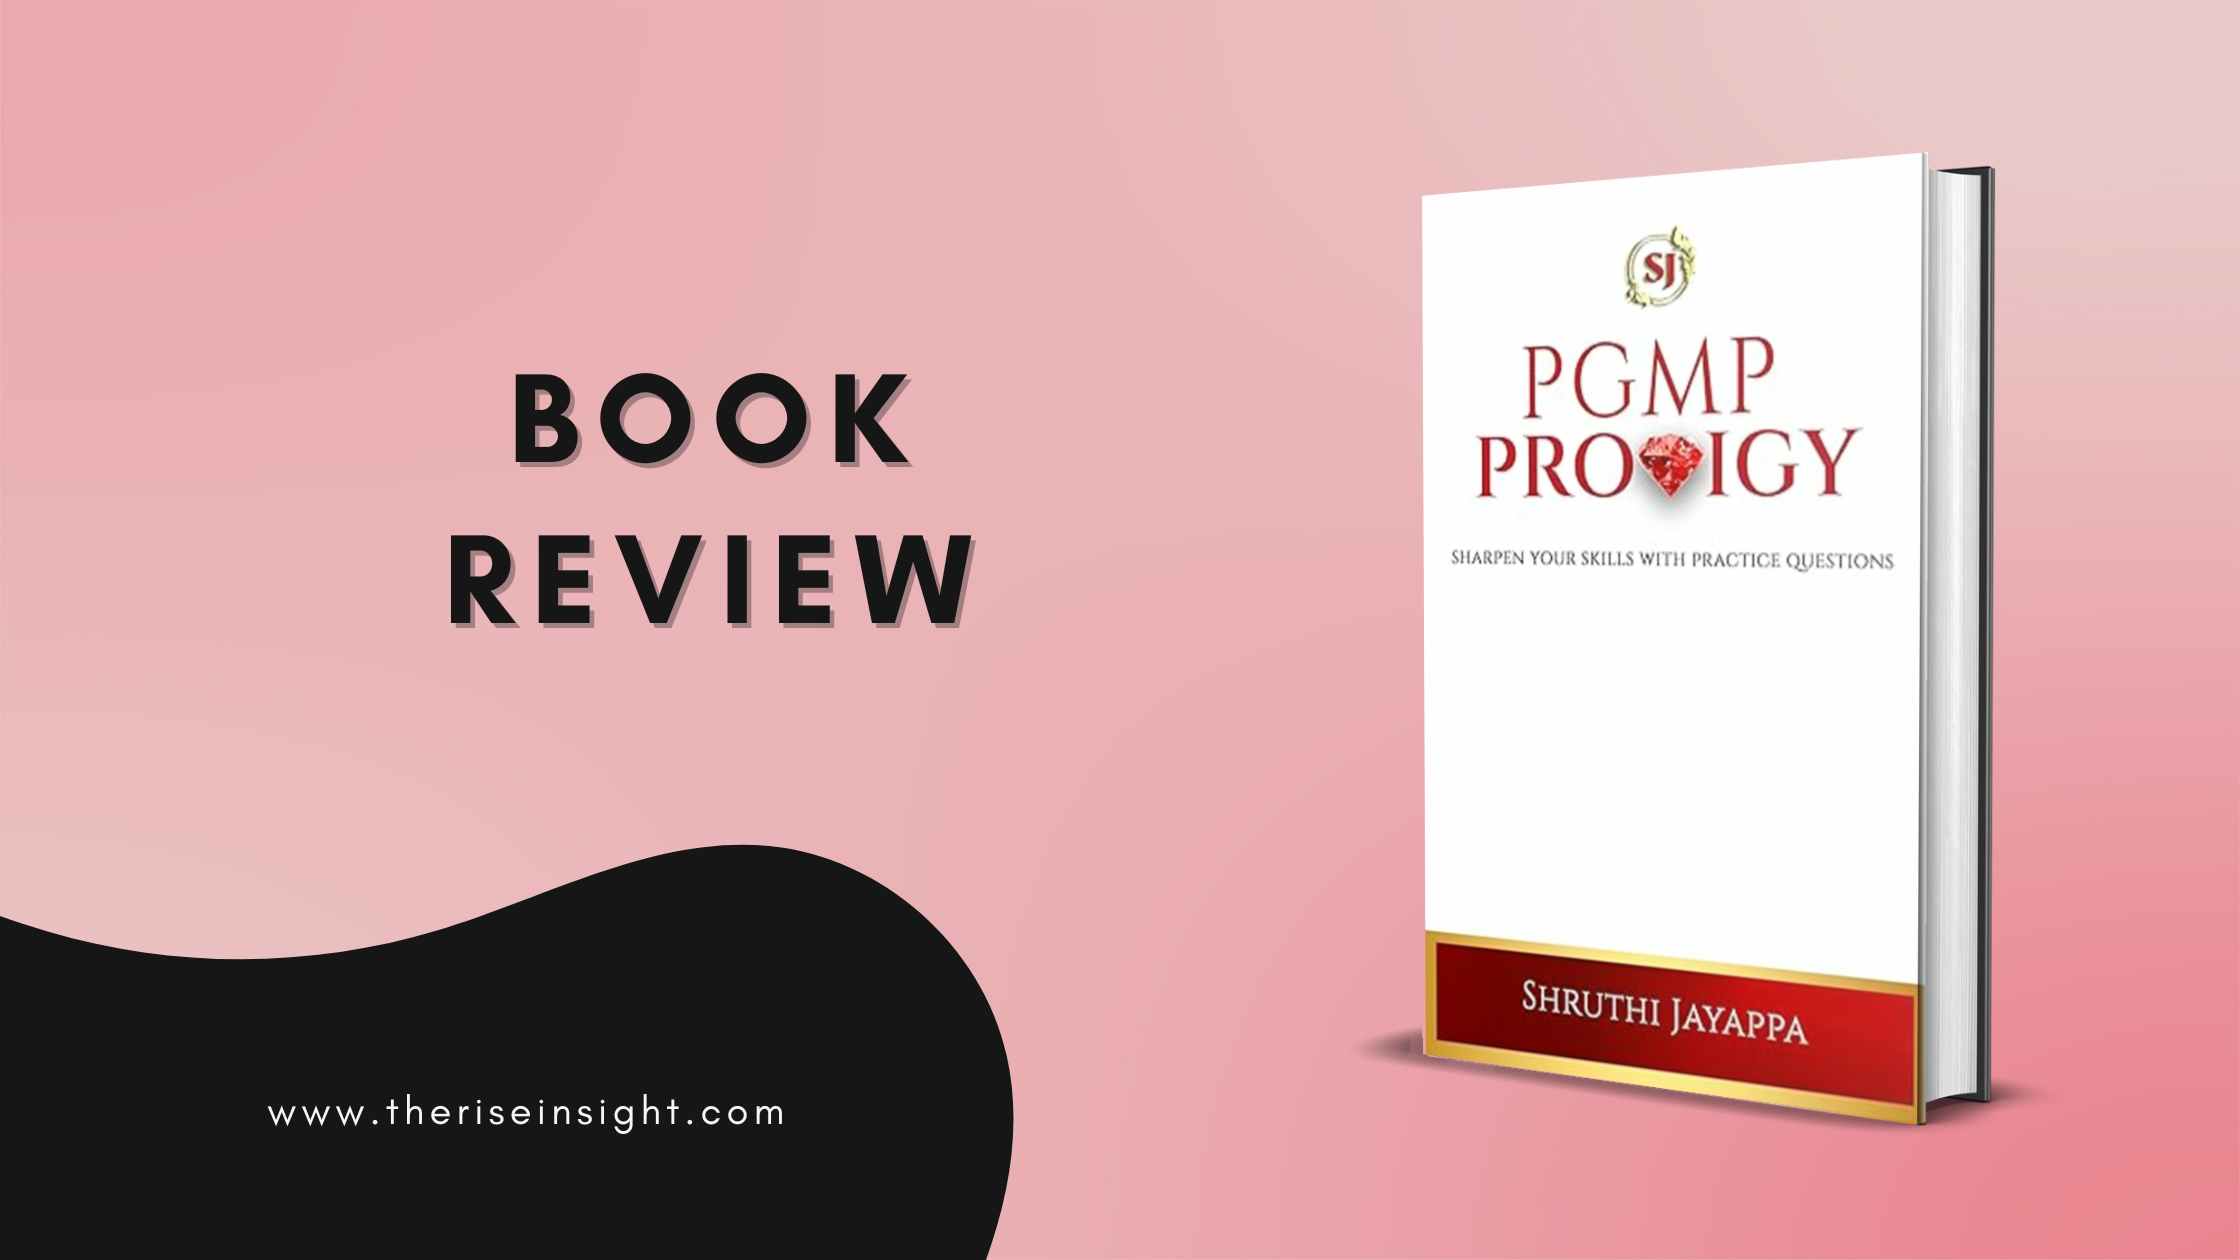 Book Review: “PGMP Prodigy: Sharpen Your Skills with Practice Questions” by Shruthi N Jayappa